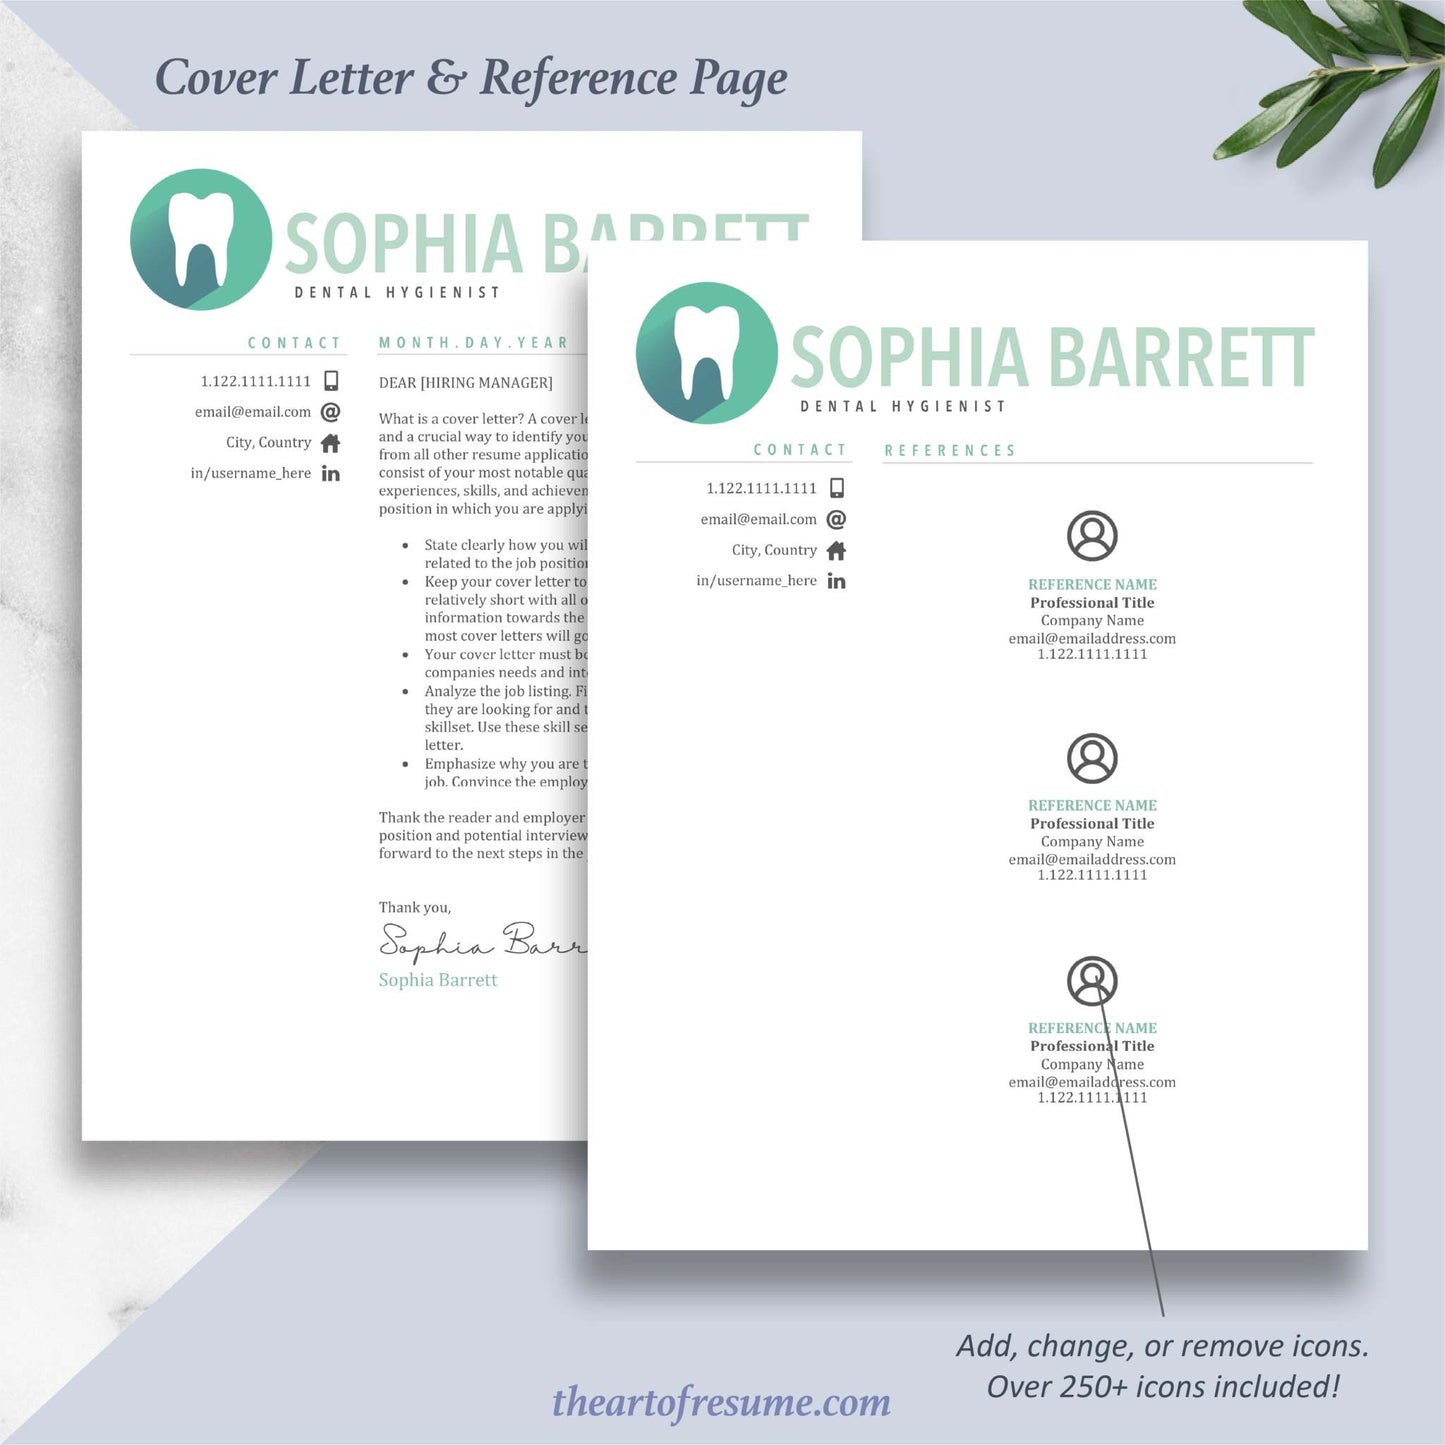 Professional Medical, Nurse, Doctor, Medical Student Matching Cover Letter and Reference Page Design Templates Download